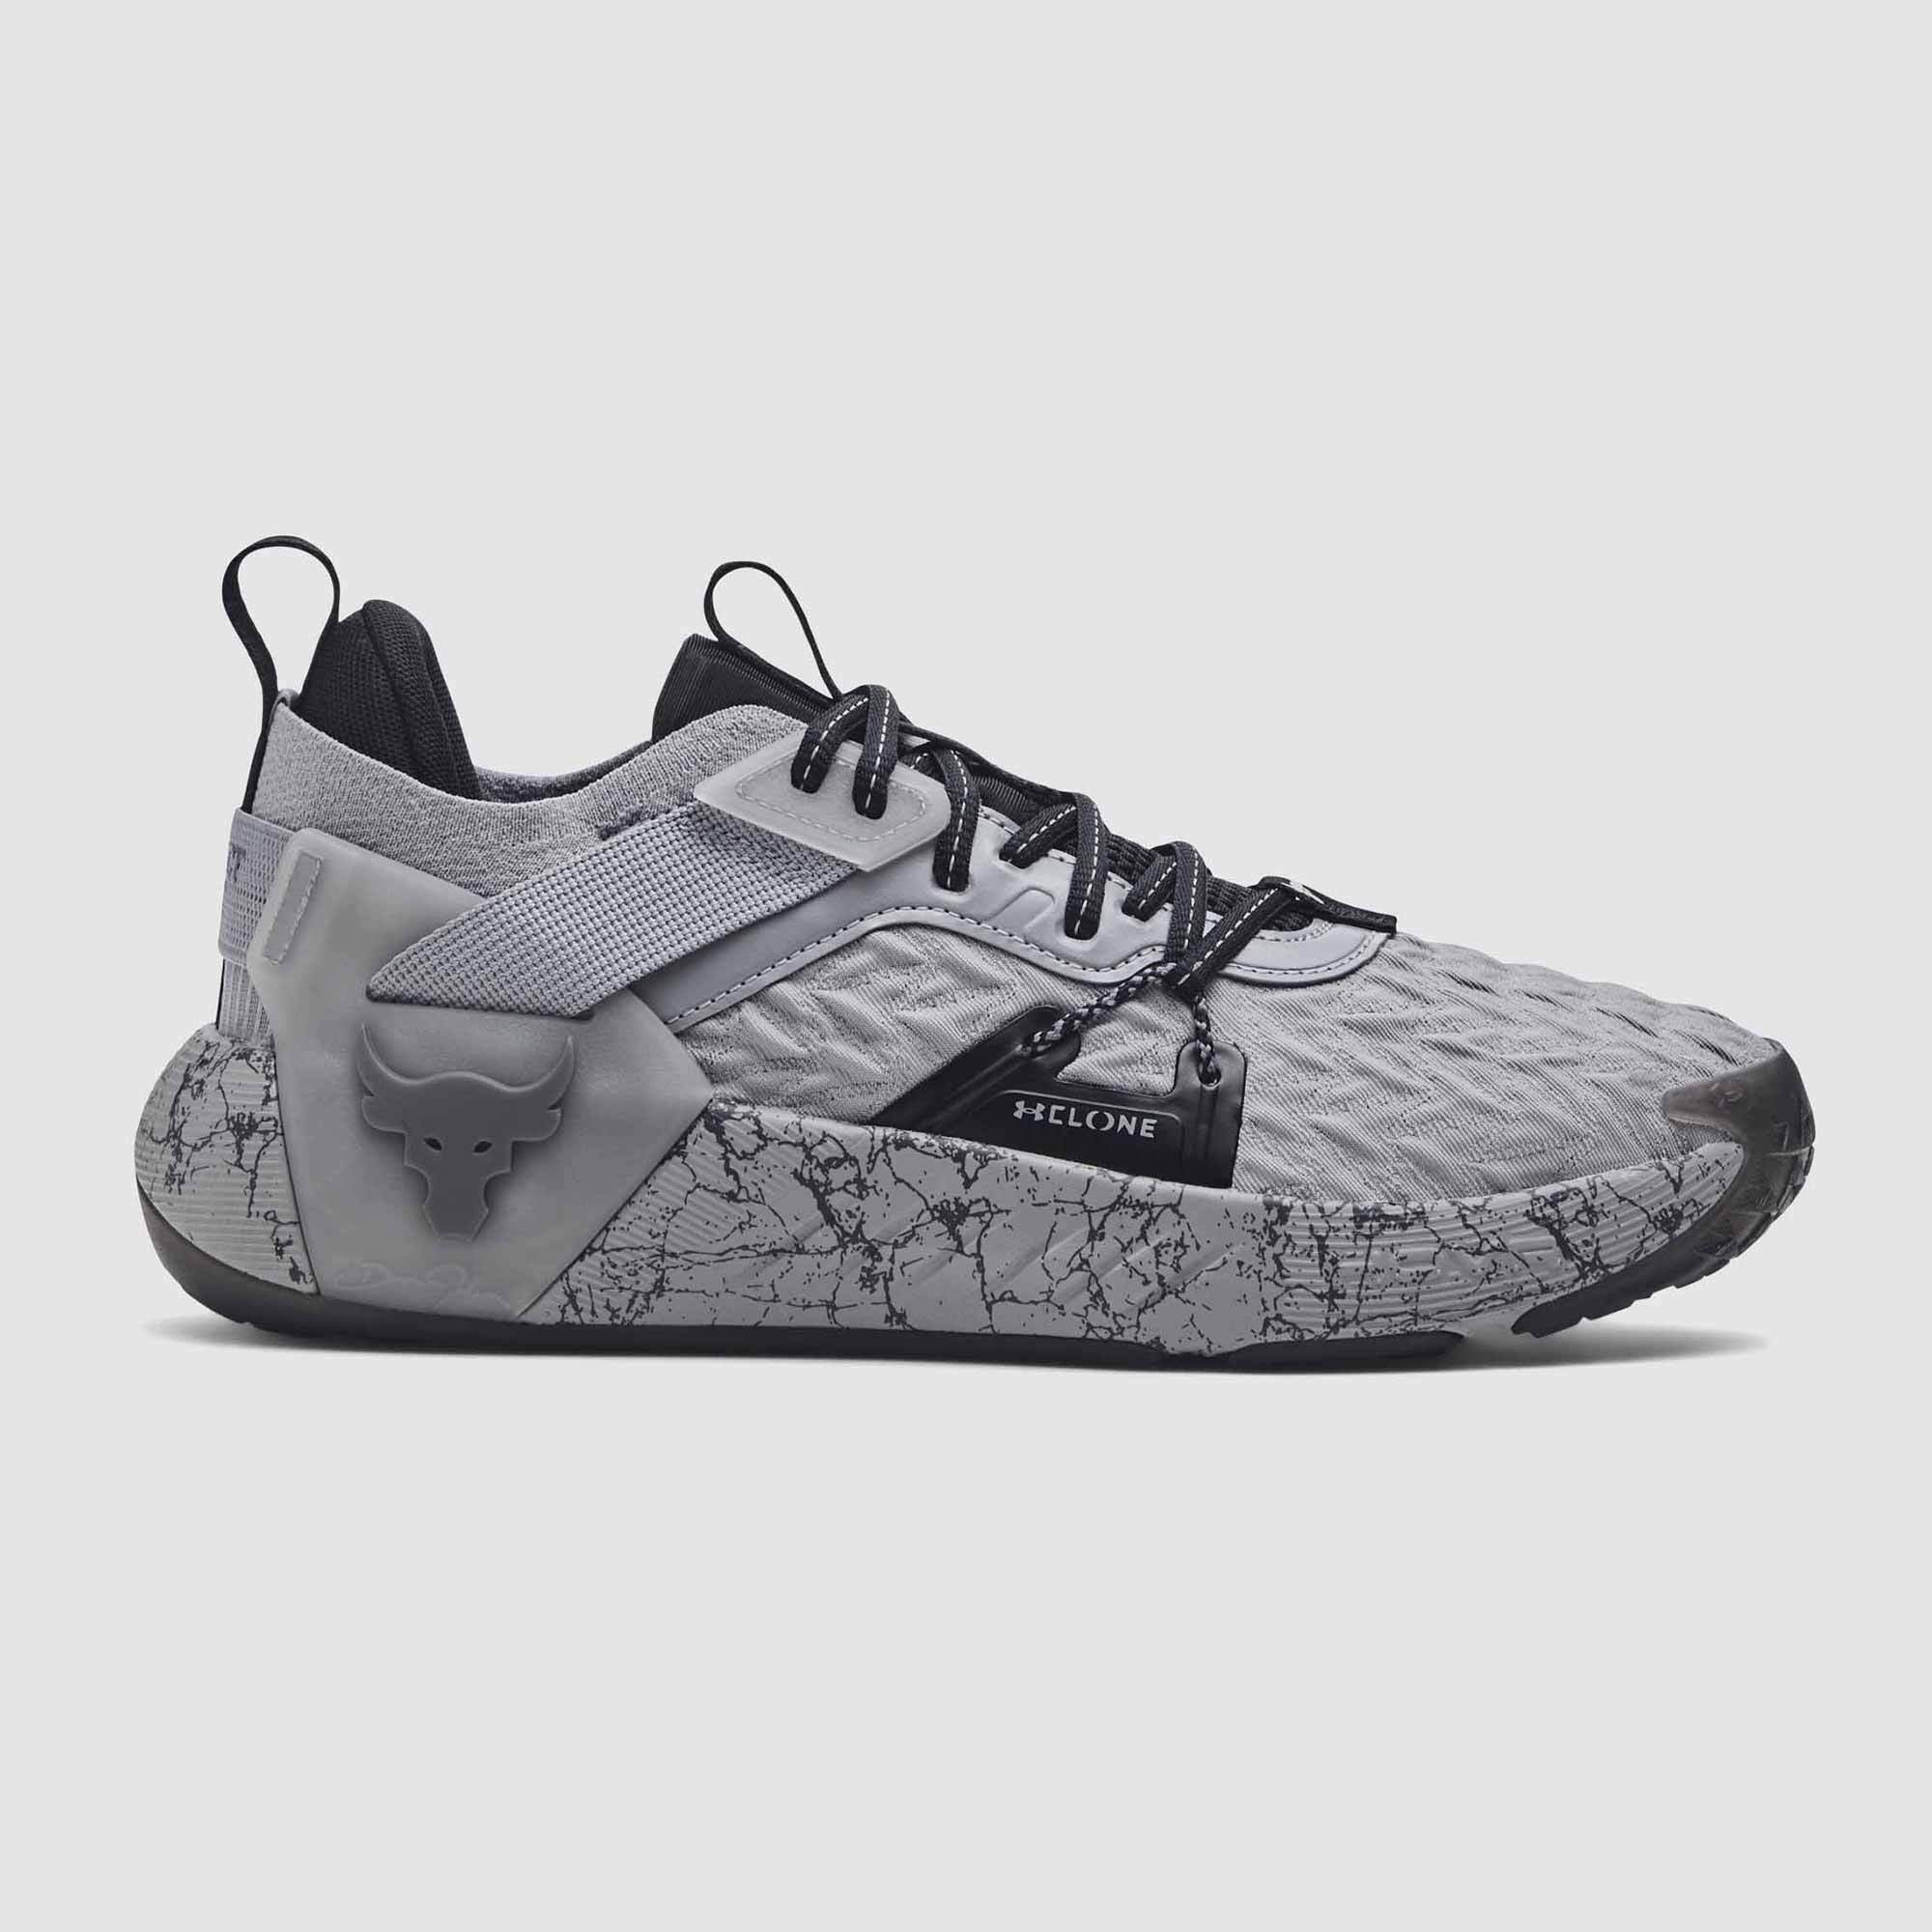 Under Armour Unisex Project Rock 6 The Bull Training Shoes